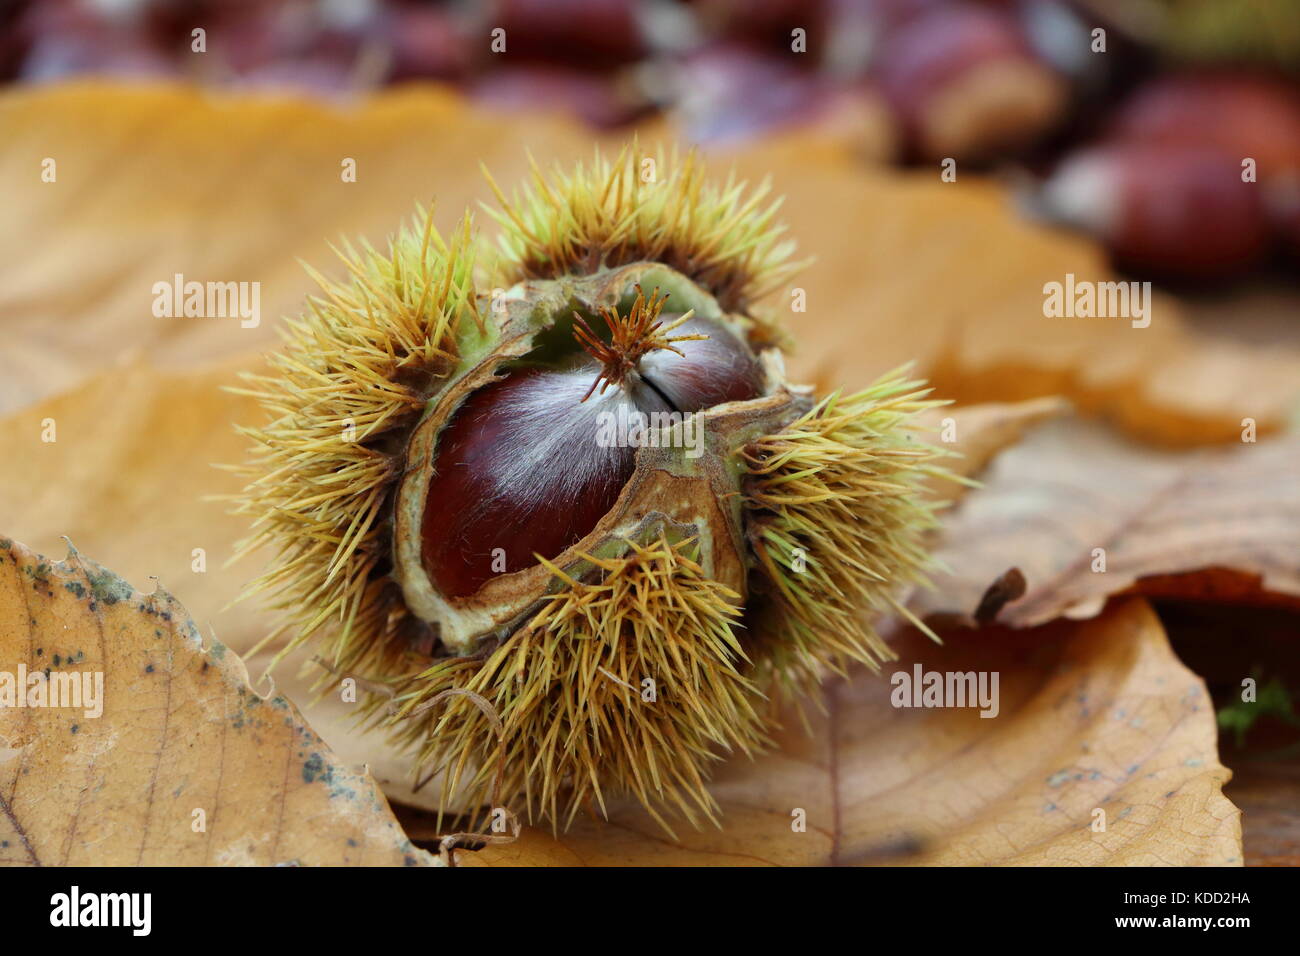 Chestnuts, husk and dead leaves after harvest during autumn Stock Photo